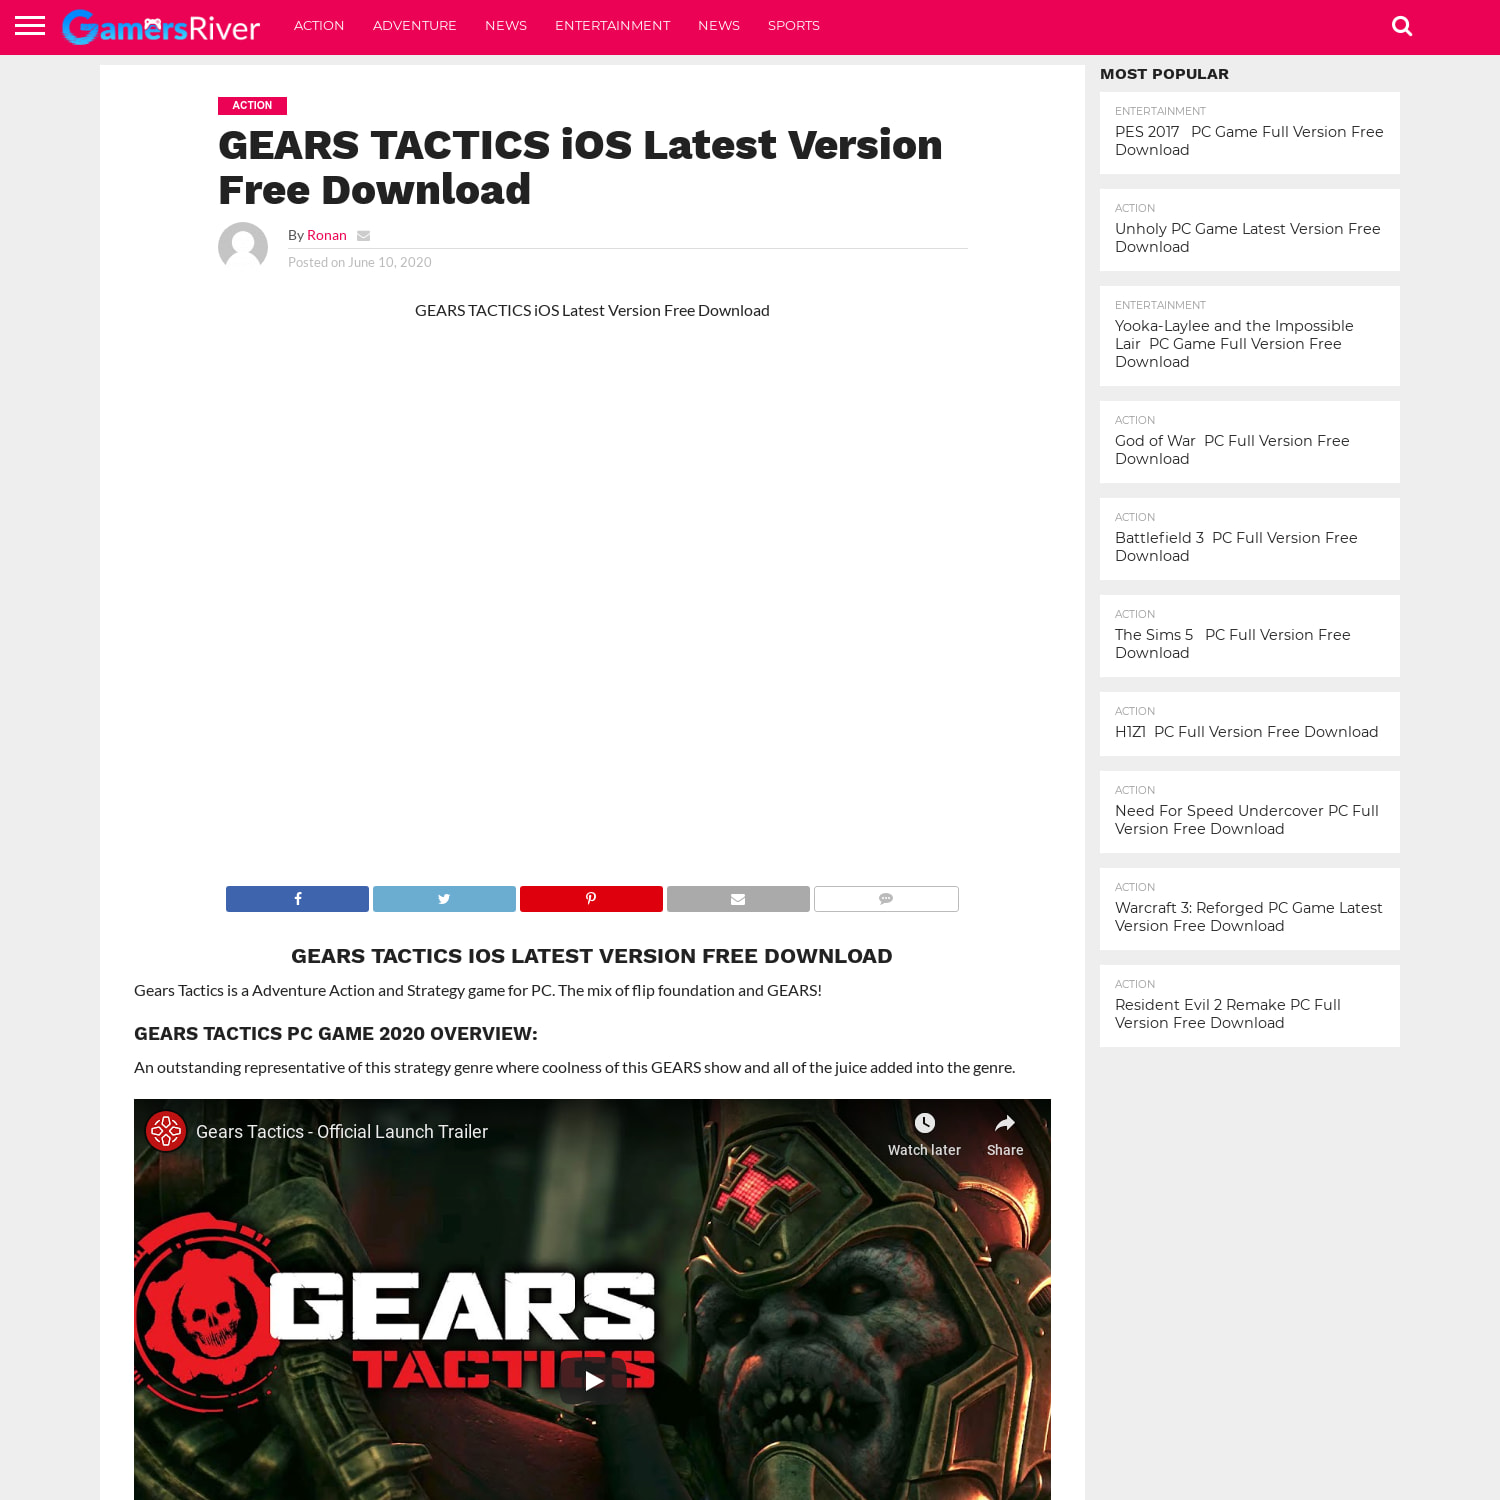 GEARS TACTICS iOS Latest Version Free Download